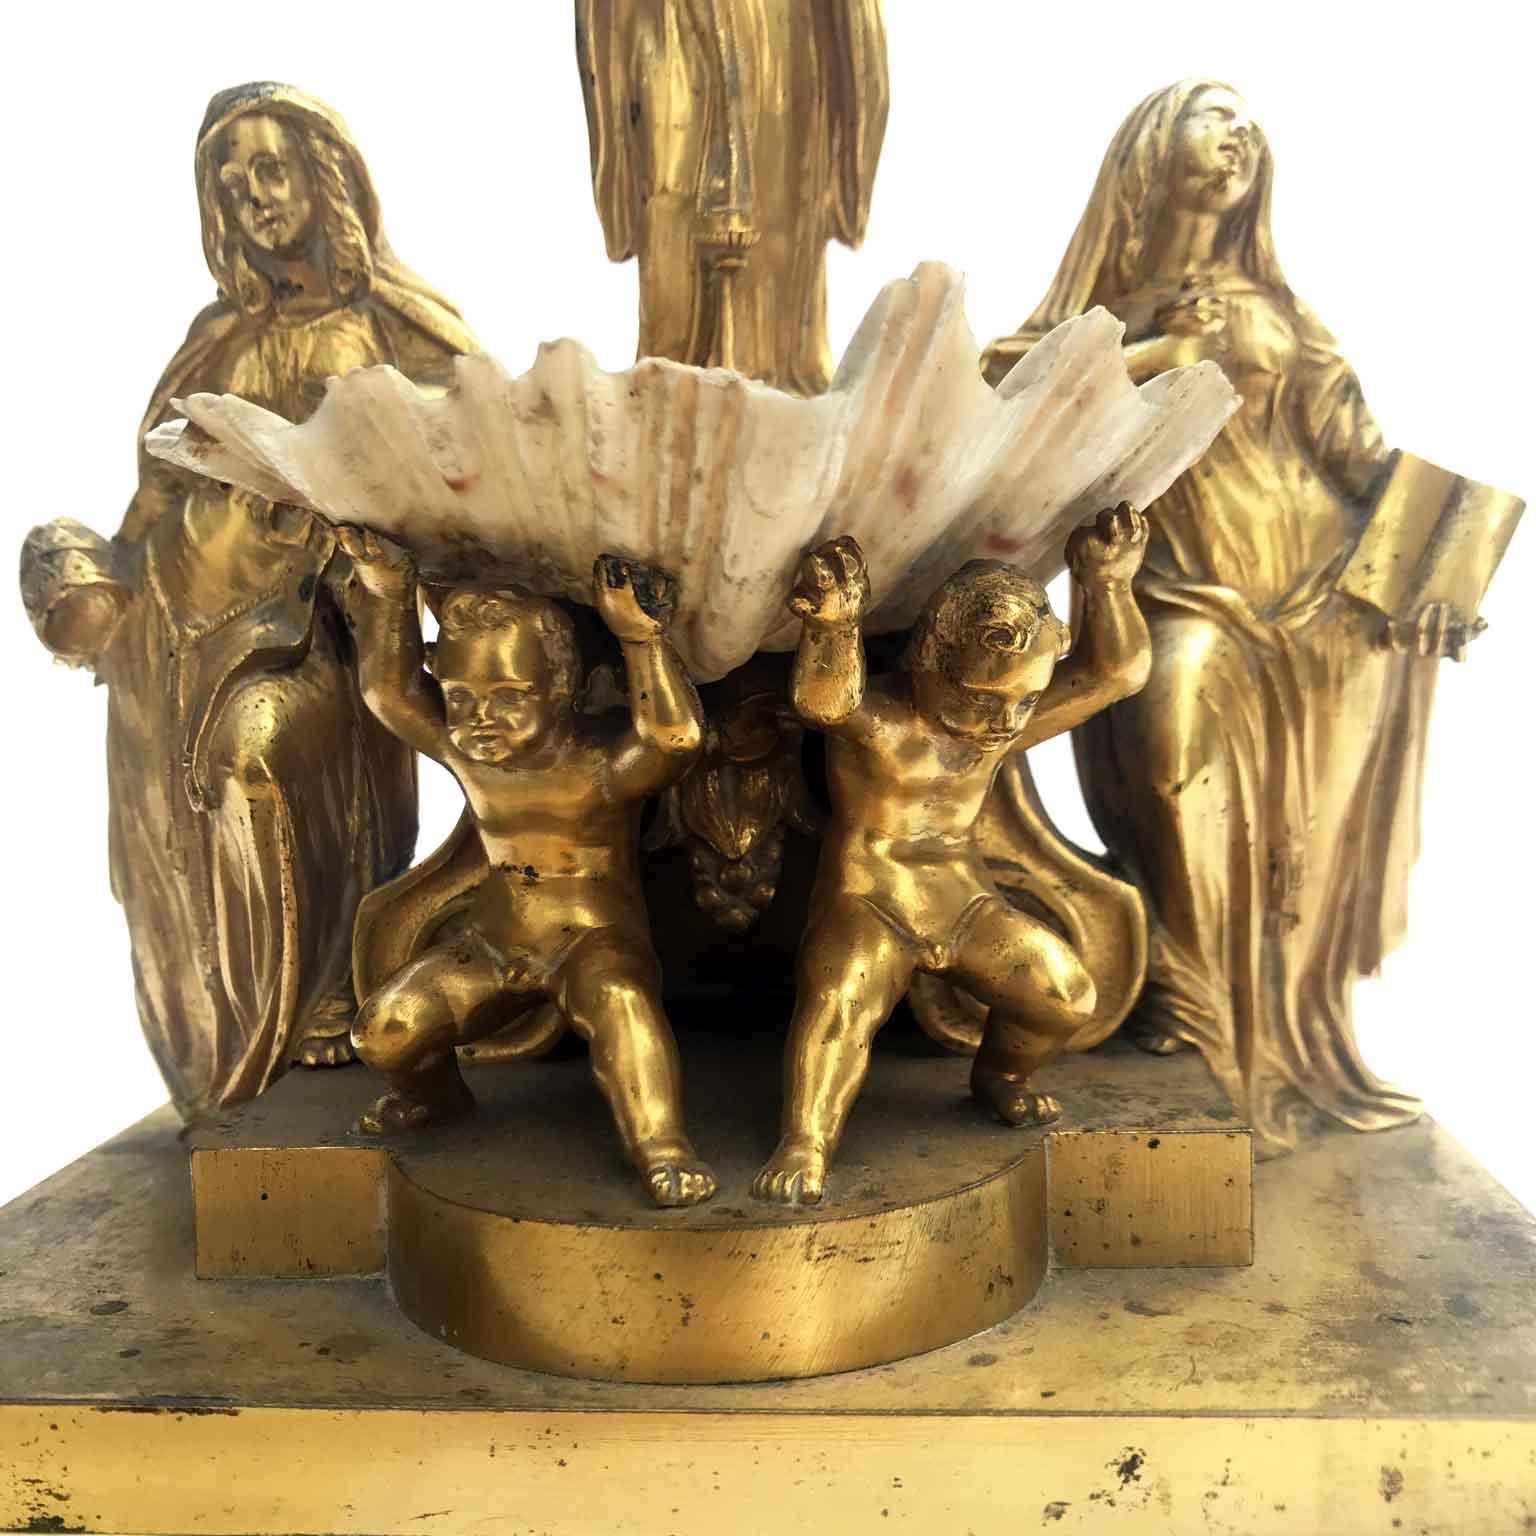 European 19th Century Italian Gilded Holy Water Font with Putti Angel Saints and Shell